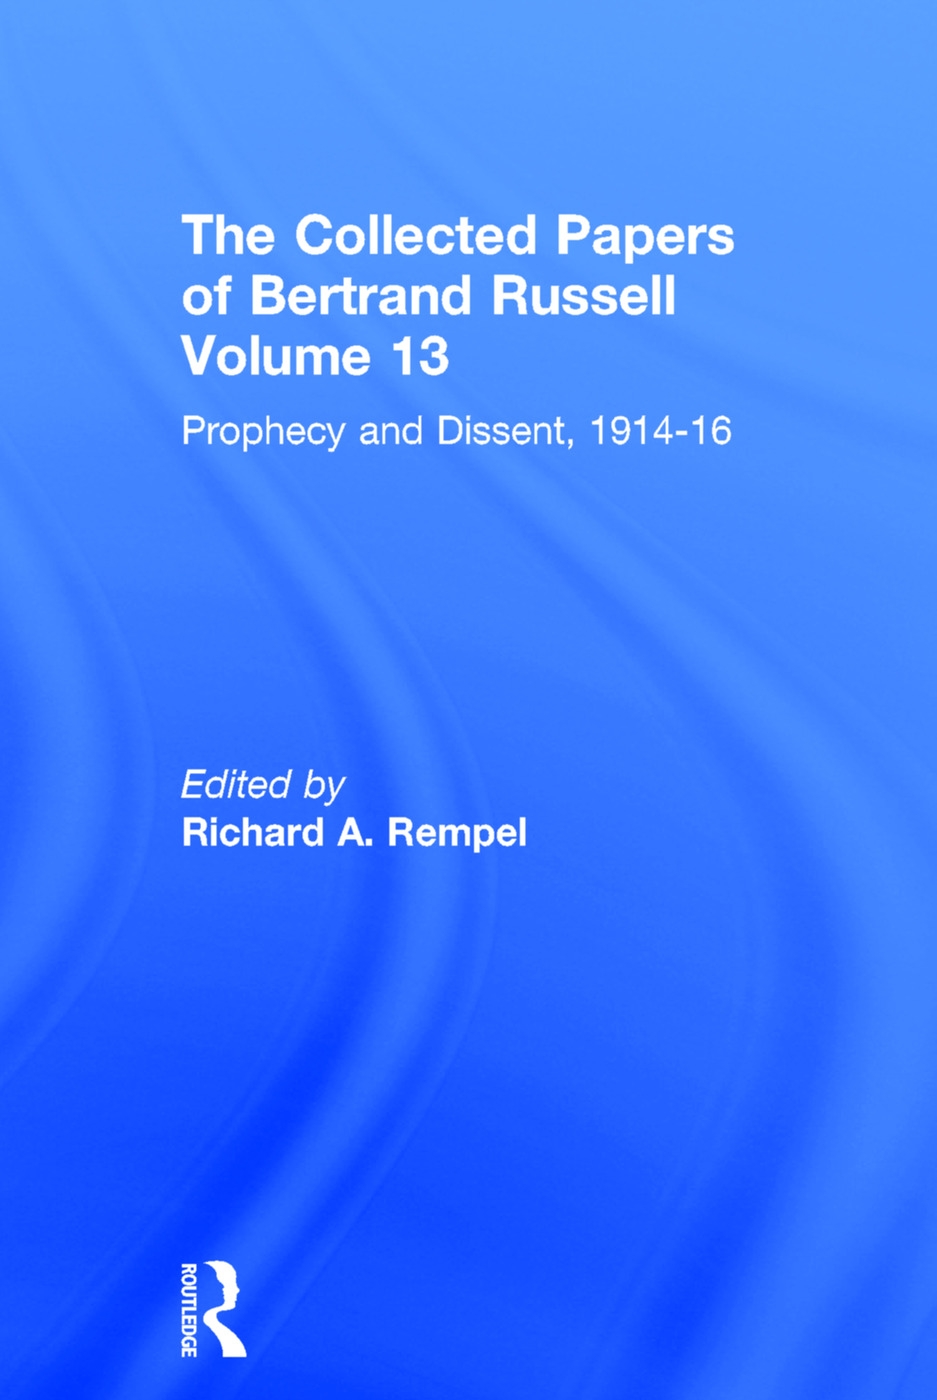 The Collected Papers of Bertrand Russell, Volume 13: Prophecy and Dissent, 1914-16